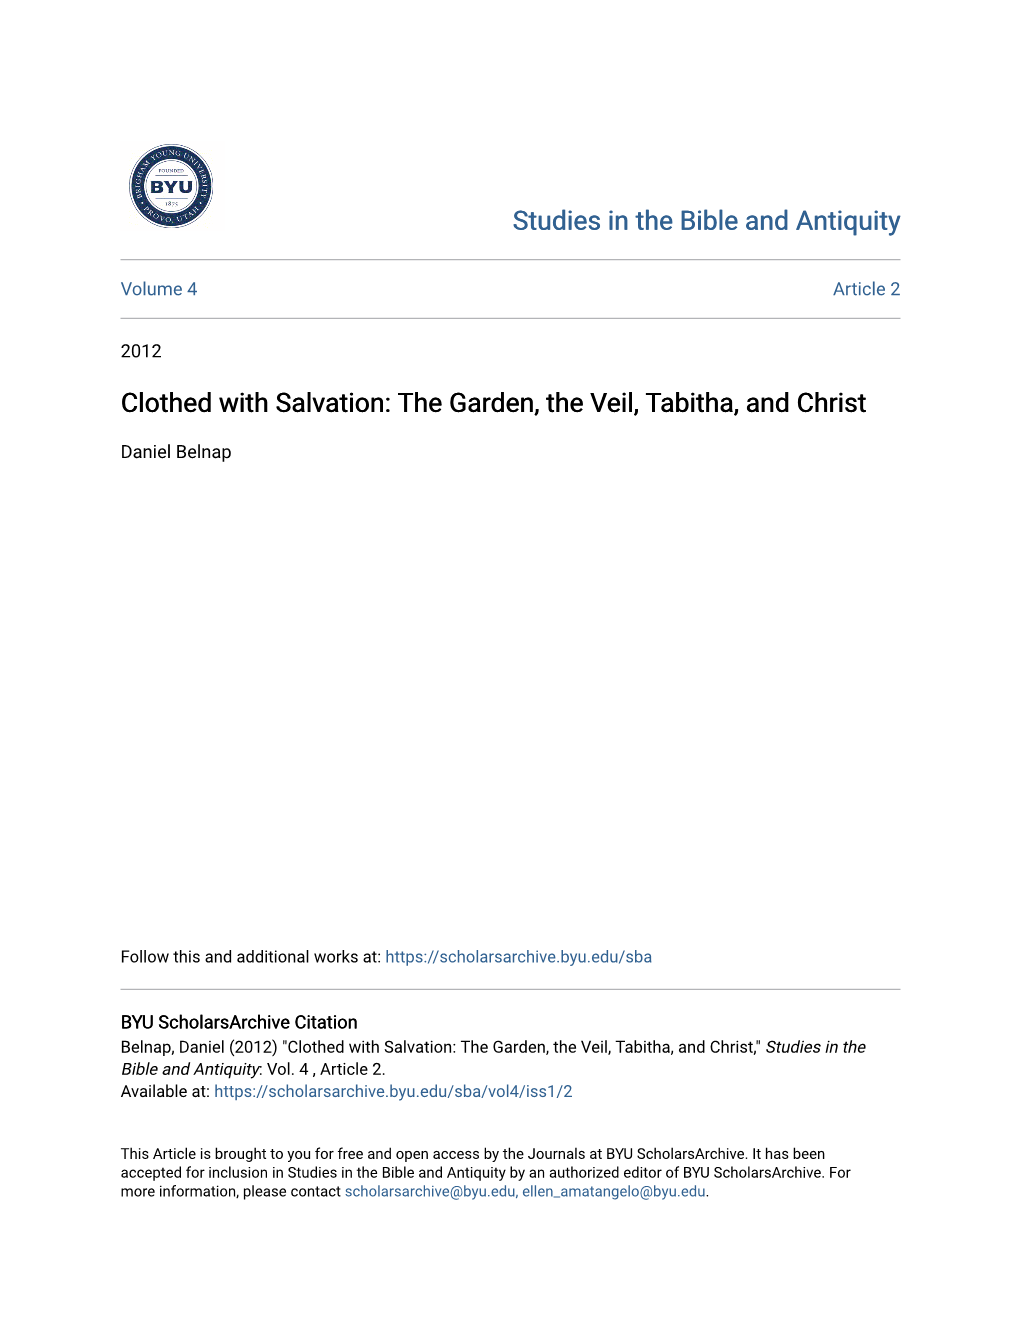 Clothed with Salvation: the Garden, the Veil, Tabitha, and Christ